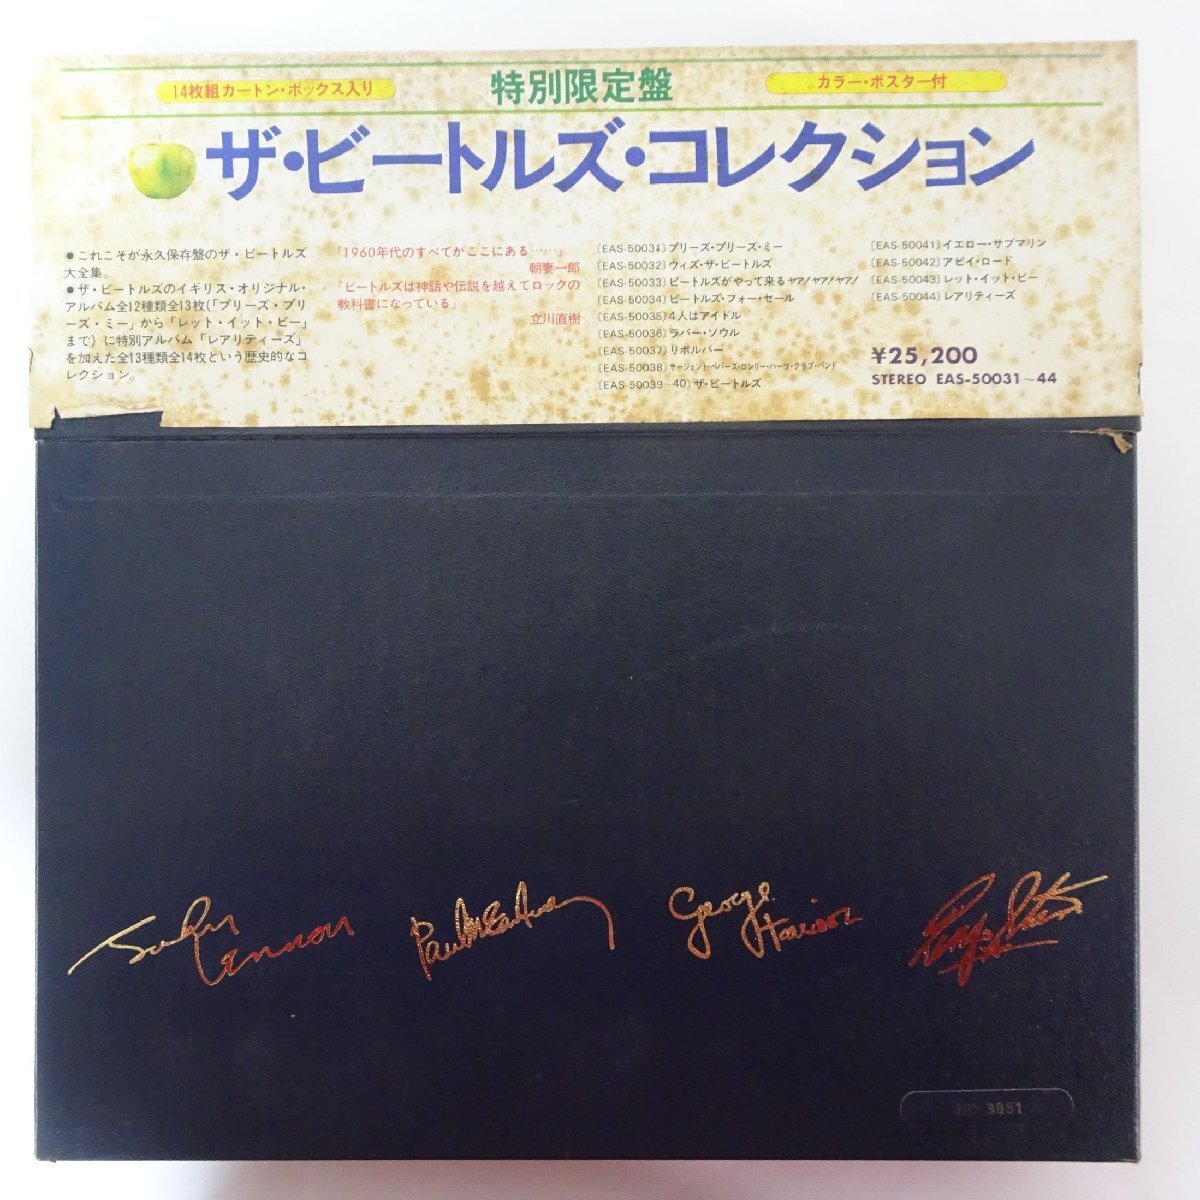 14030928;[ beautiful record /. with belt /14LP/BOX/ poster attaching ] The * Beatles The Beatles / The Beatles Collection The * Beatles * collection 